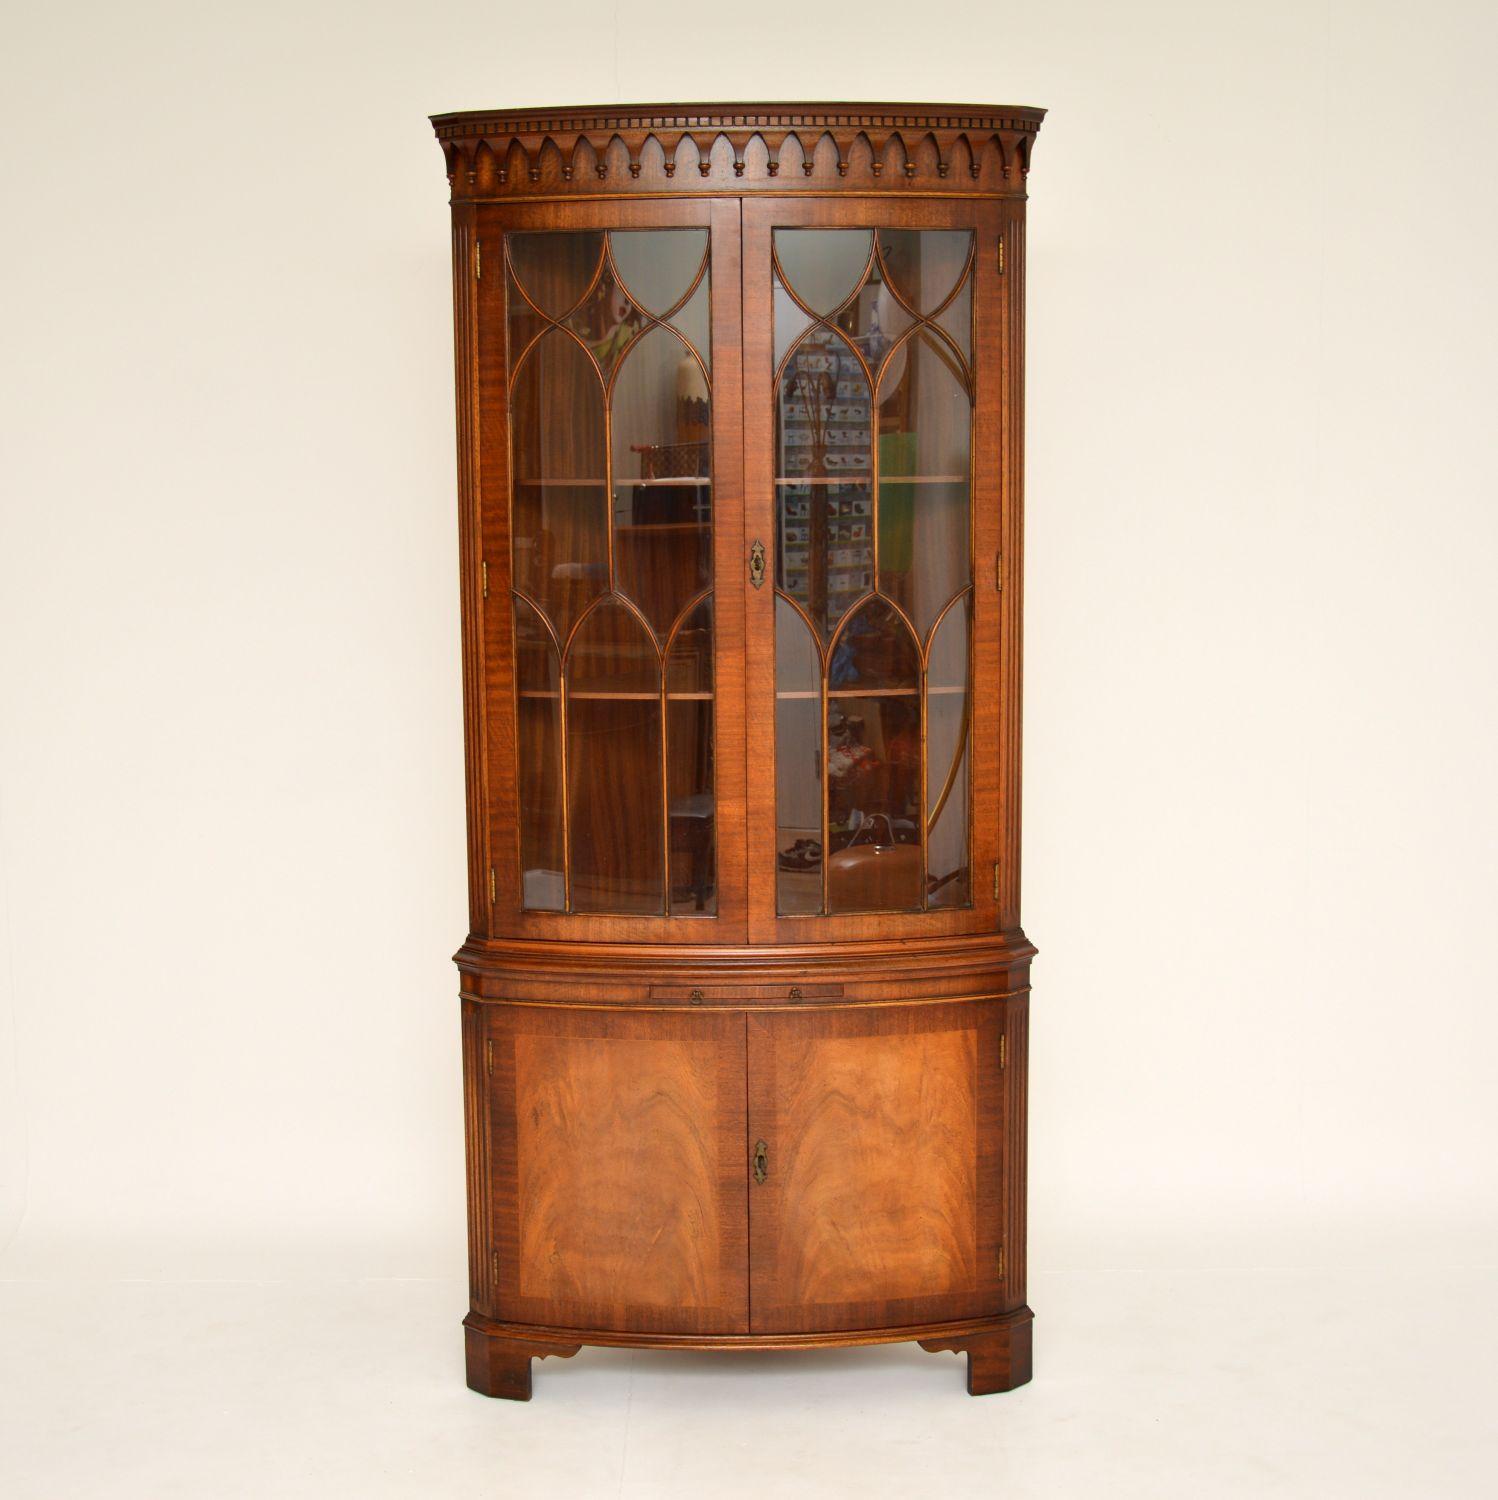 A beautifully made bow front corner cabinet in the antique Georgian style. This was made in England, it dates from around the 1950’s.

The quality is superb, this has gorgeous flame wood grain doors, it sits on bracket feet and has a stunning tear